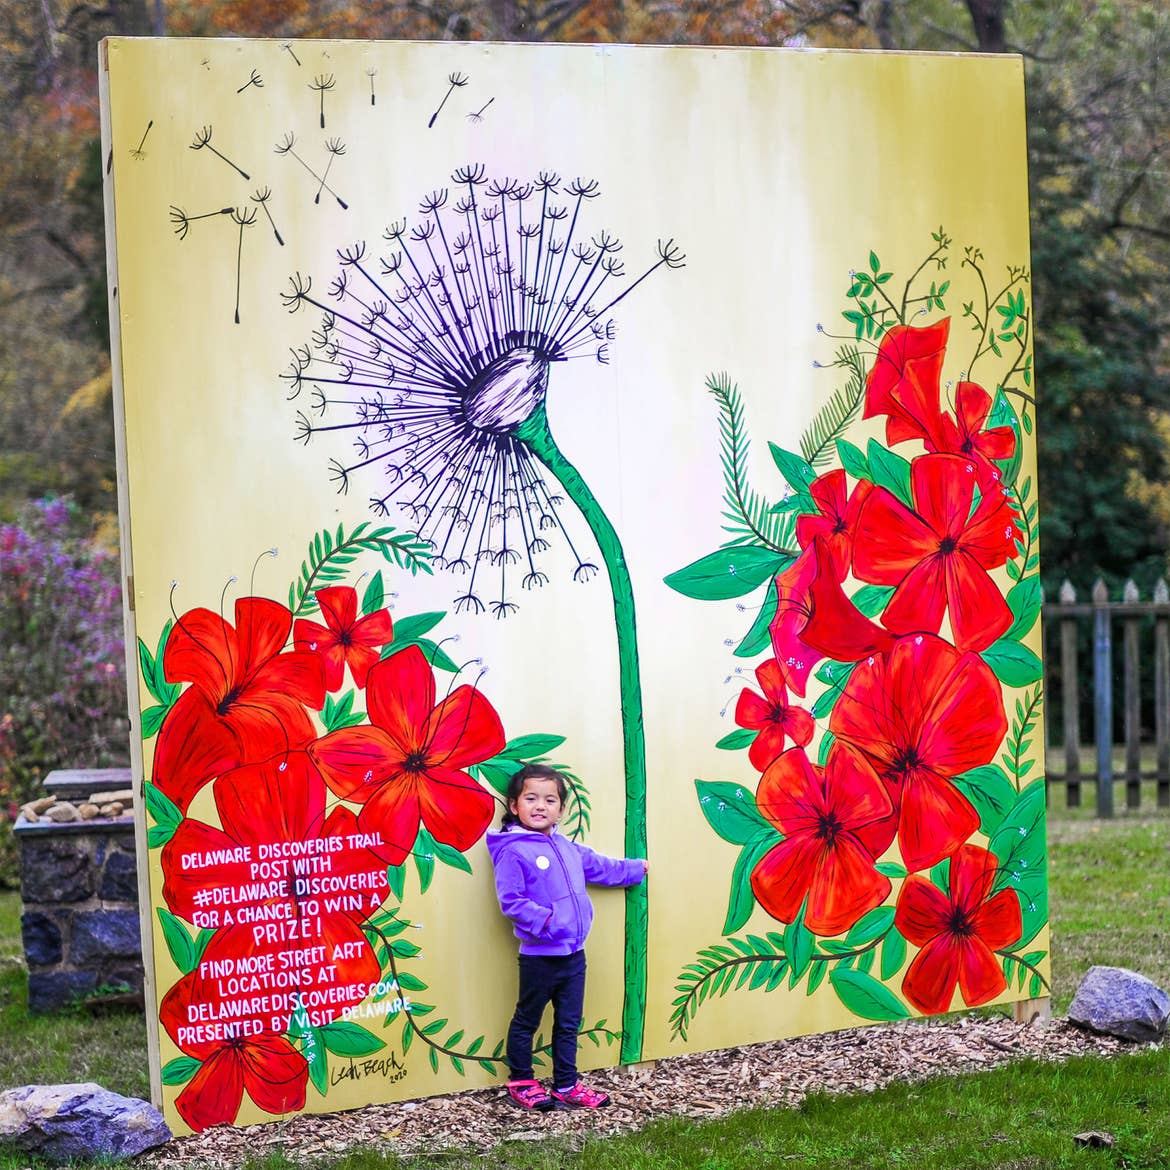 A young girl in a purple coat poses near a mural as if she were holding a purple dandelion surrounded by red poppy flowers outdoors.